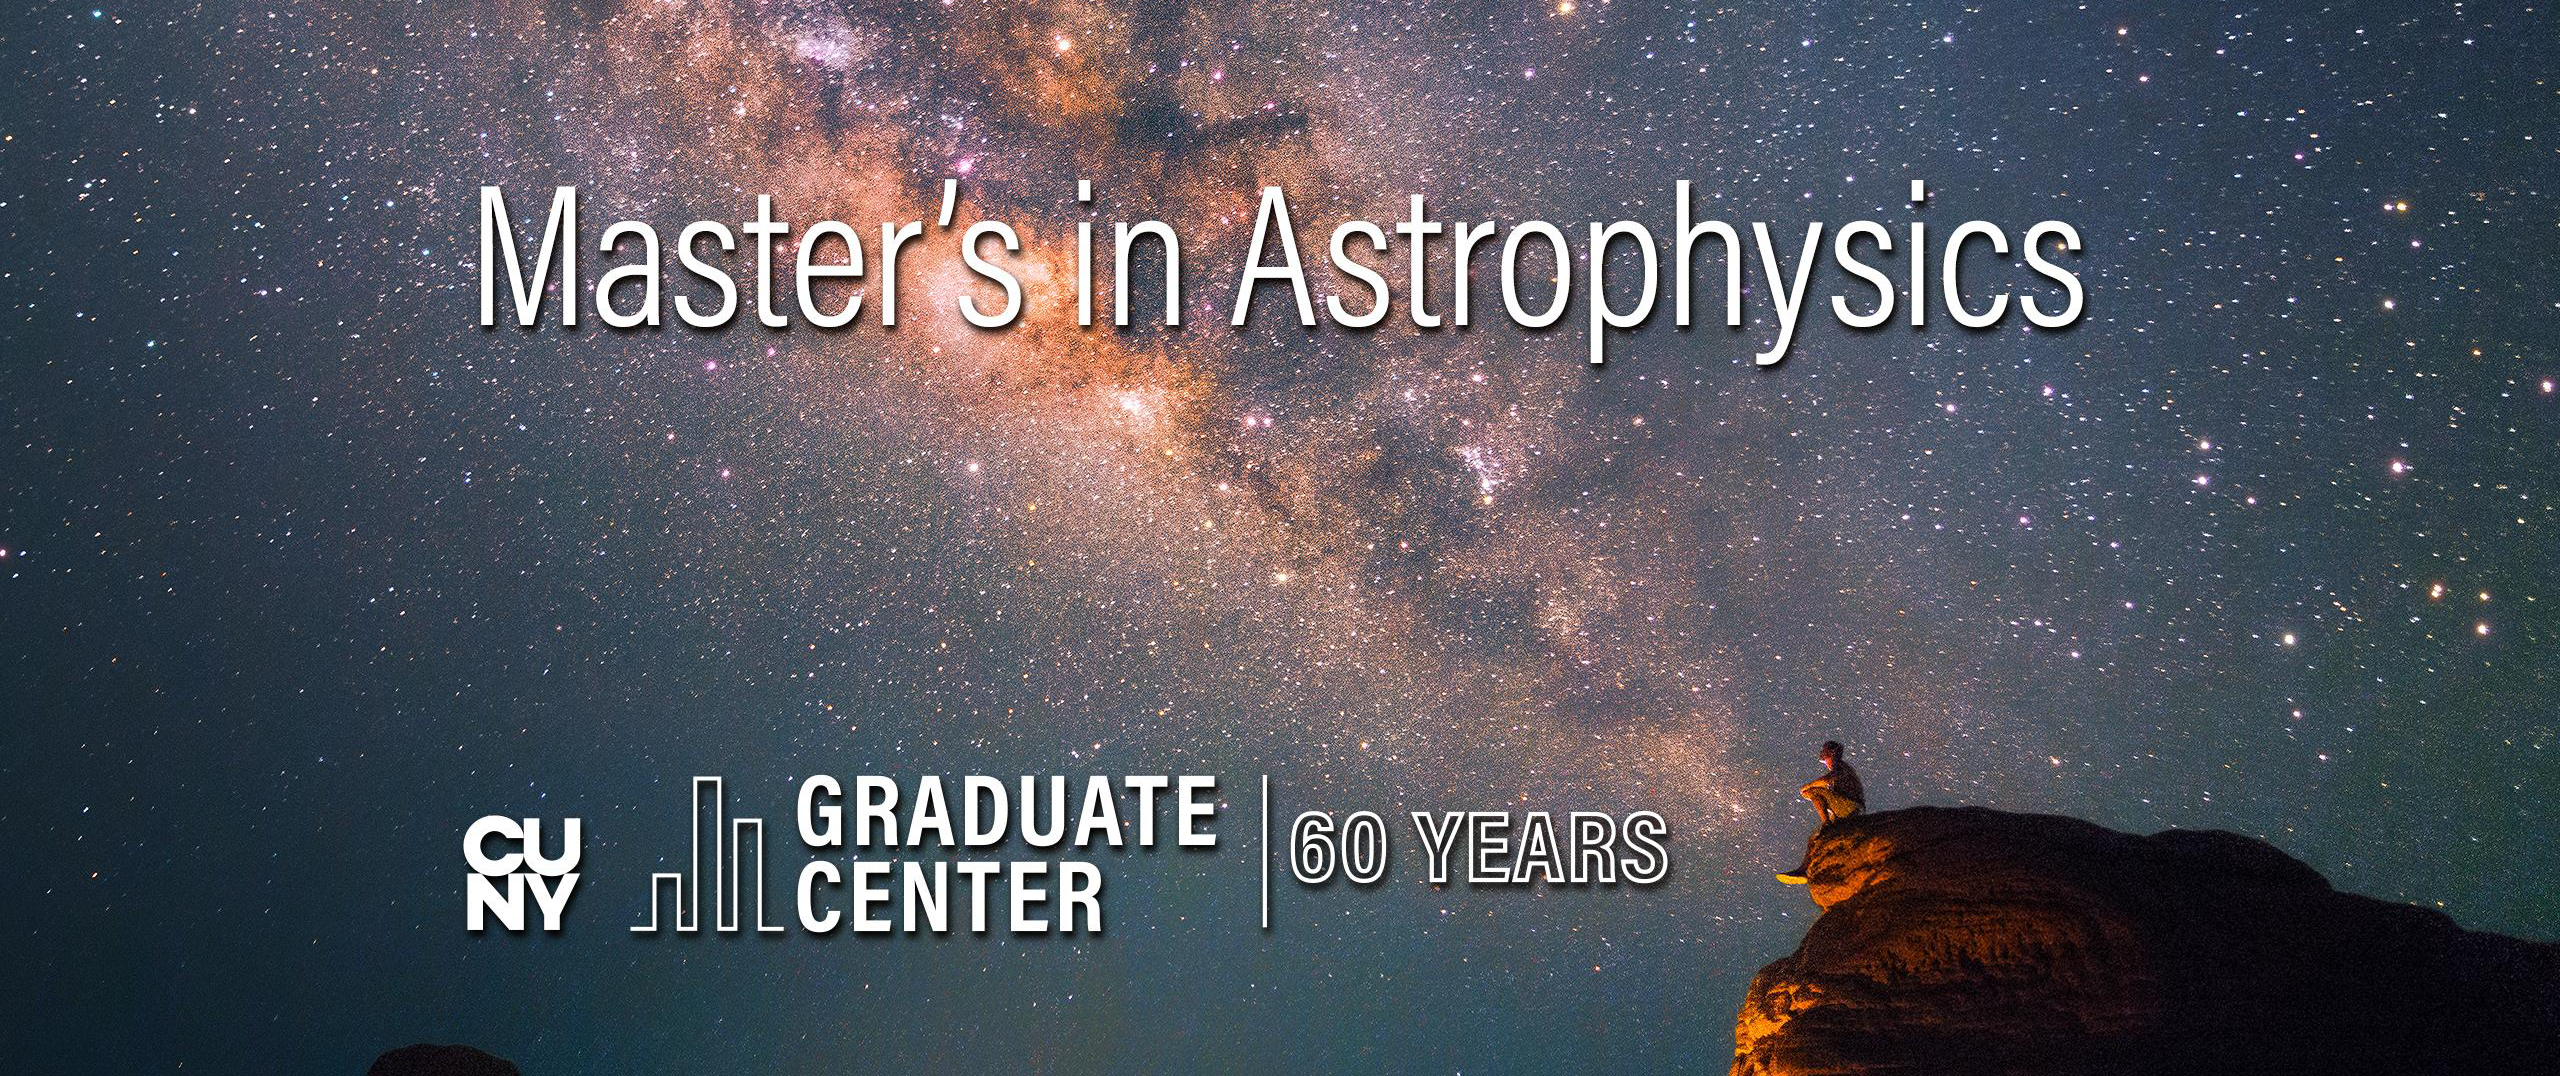 New Masters in Astrophysics Program at CUNY